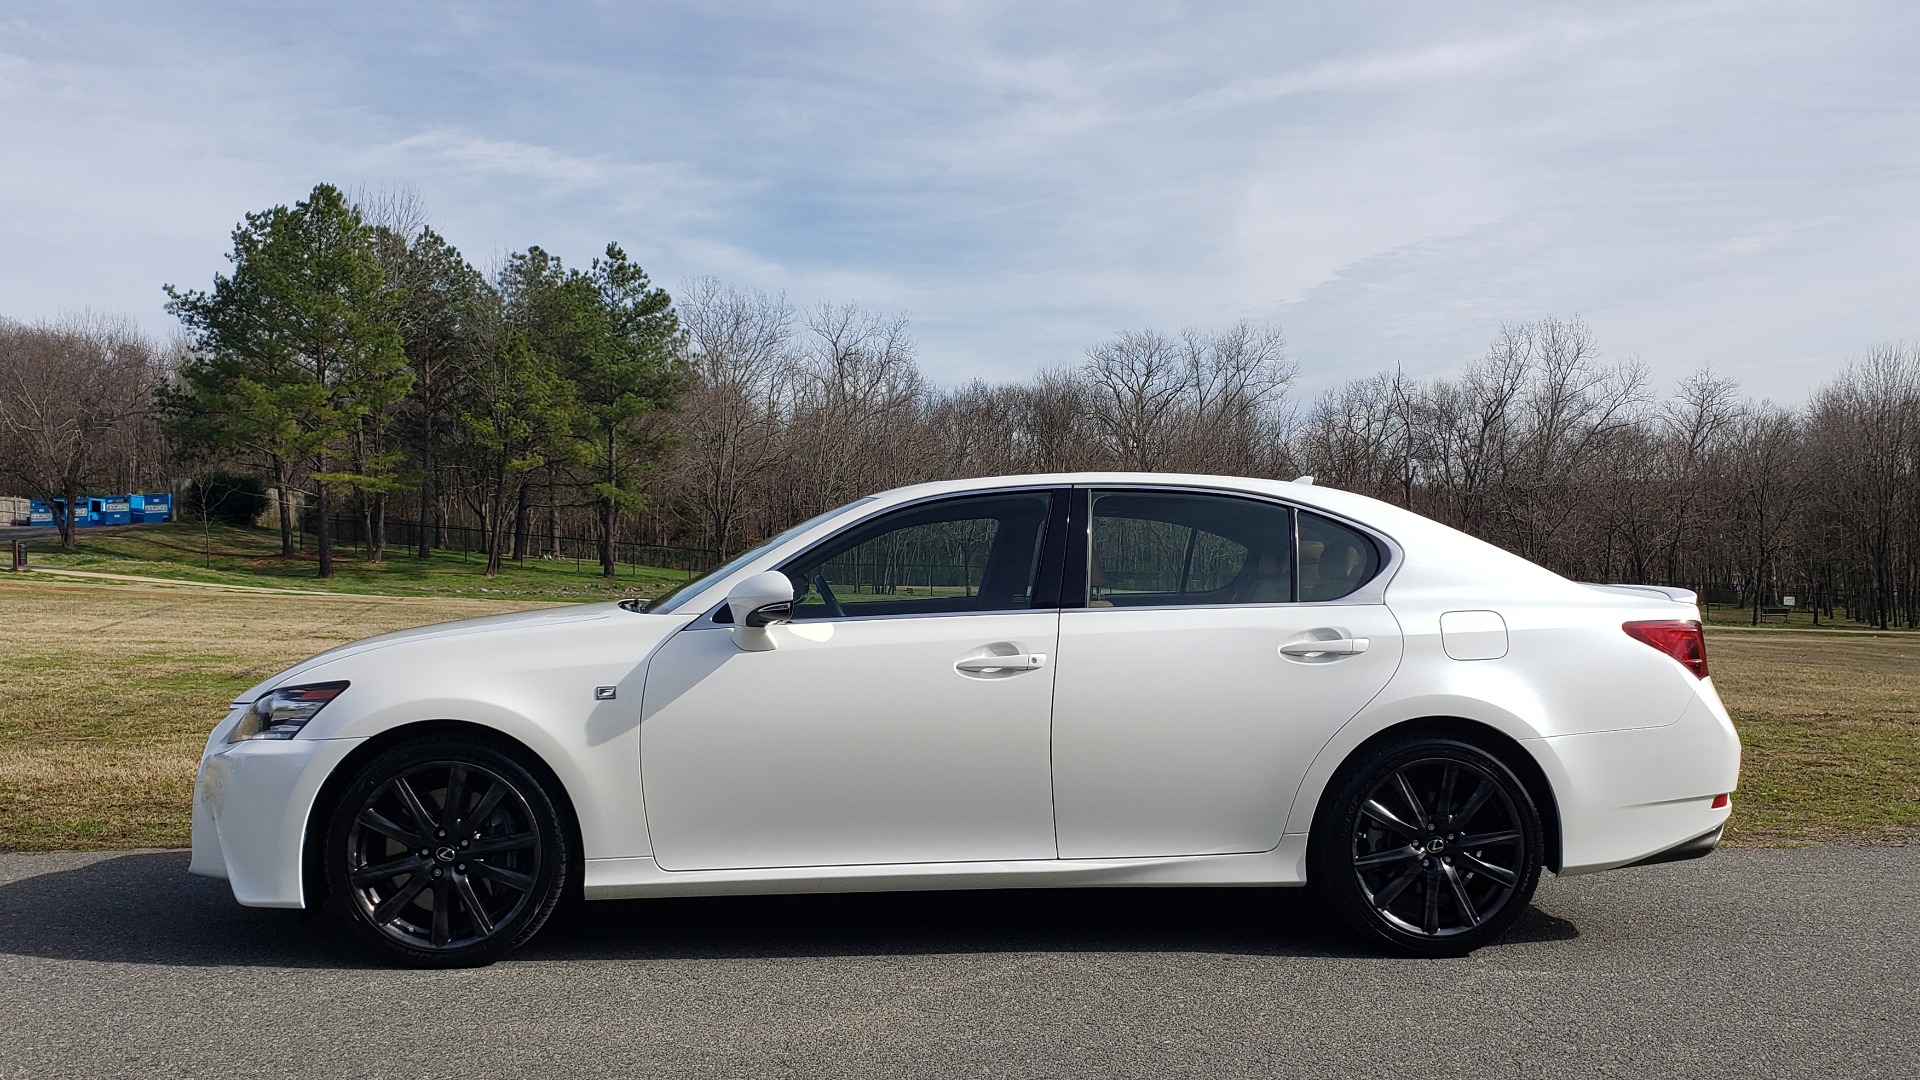 Used 2013 Lexus GS 350 F-SPORT / NAV / SUNROOF / BSM / PRK ASST / REARVIEW for sale Sold at Formula Imports in Charlotte NC 28227 2